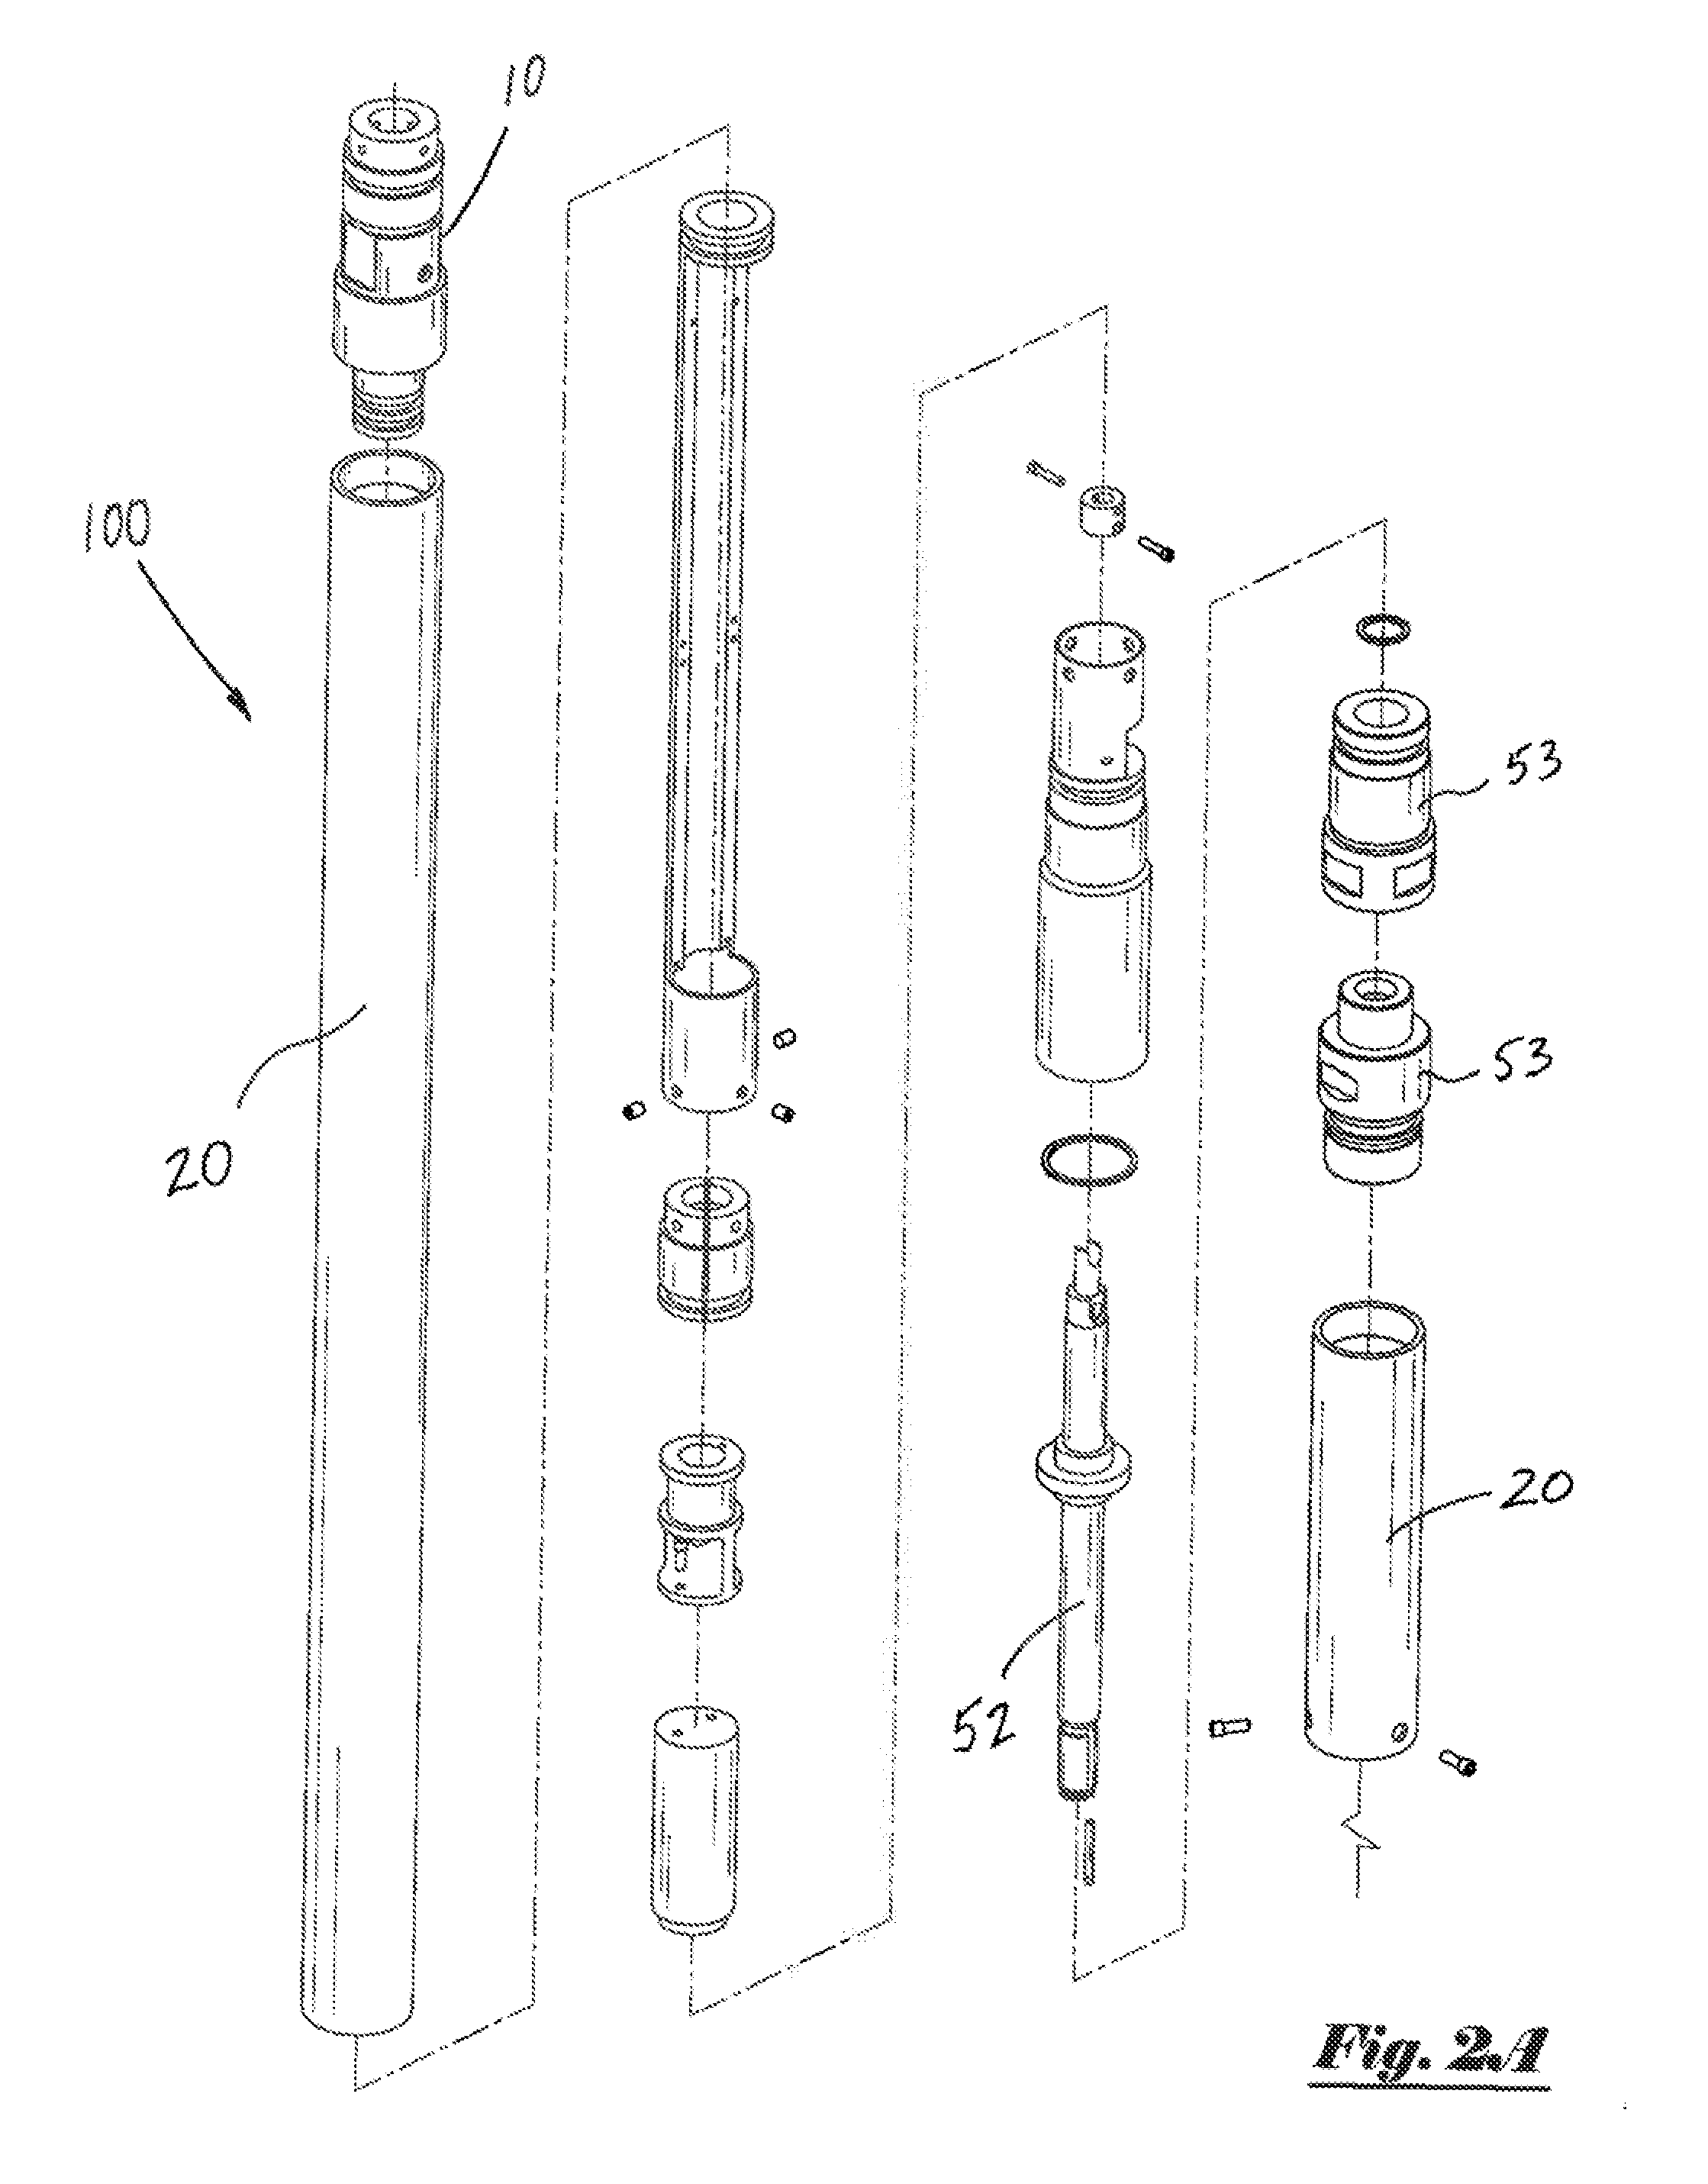 Side view downhole camera and lighting apparatus and method